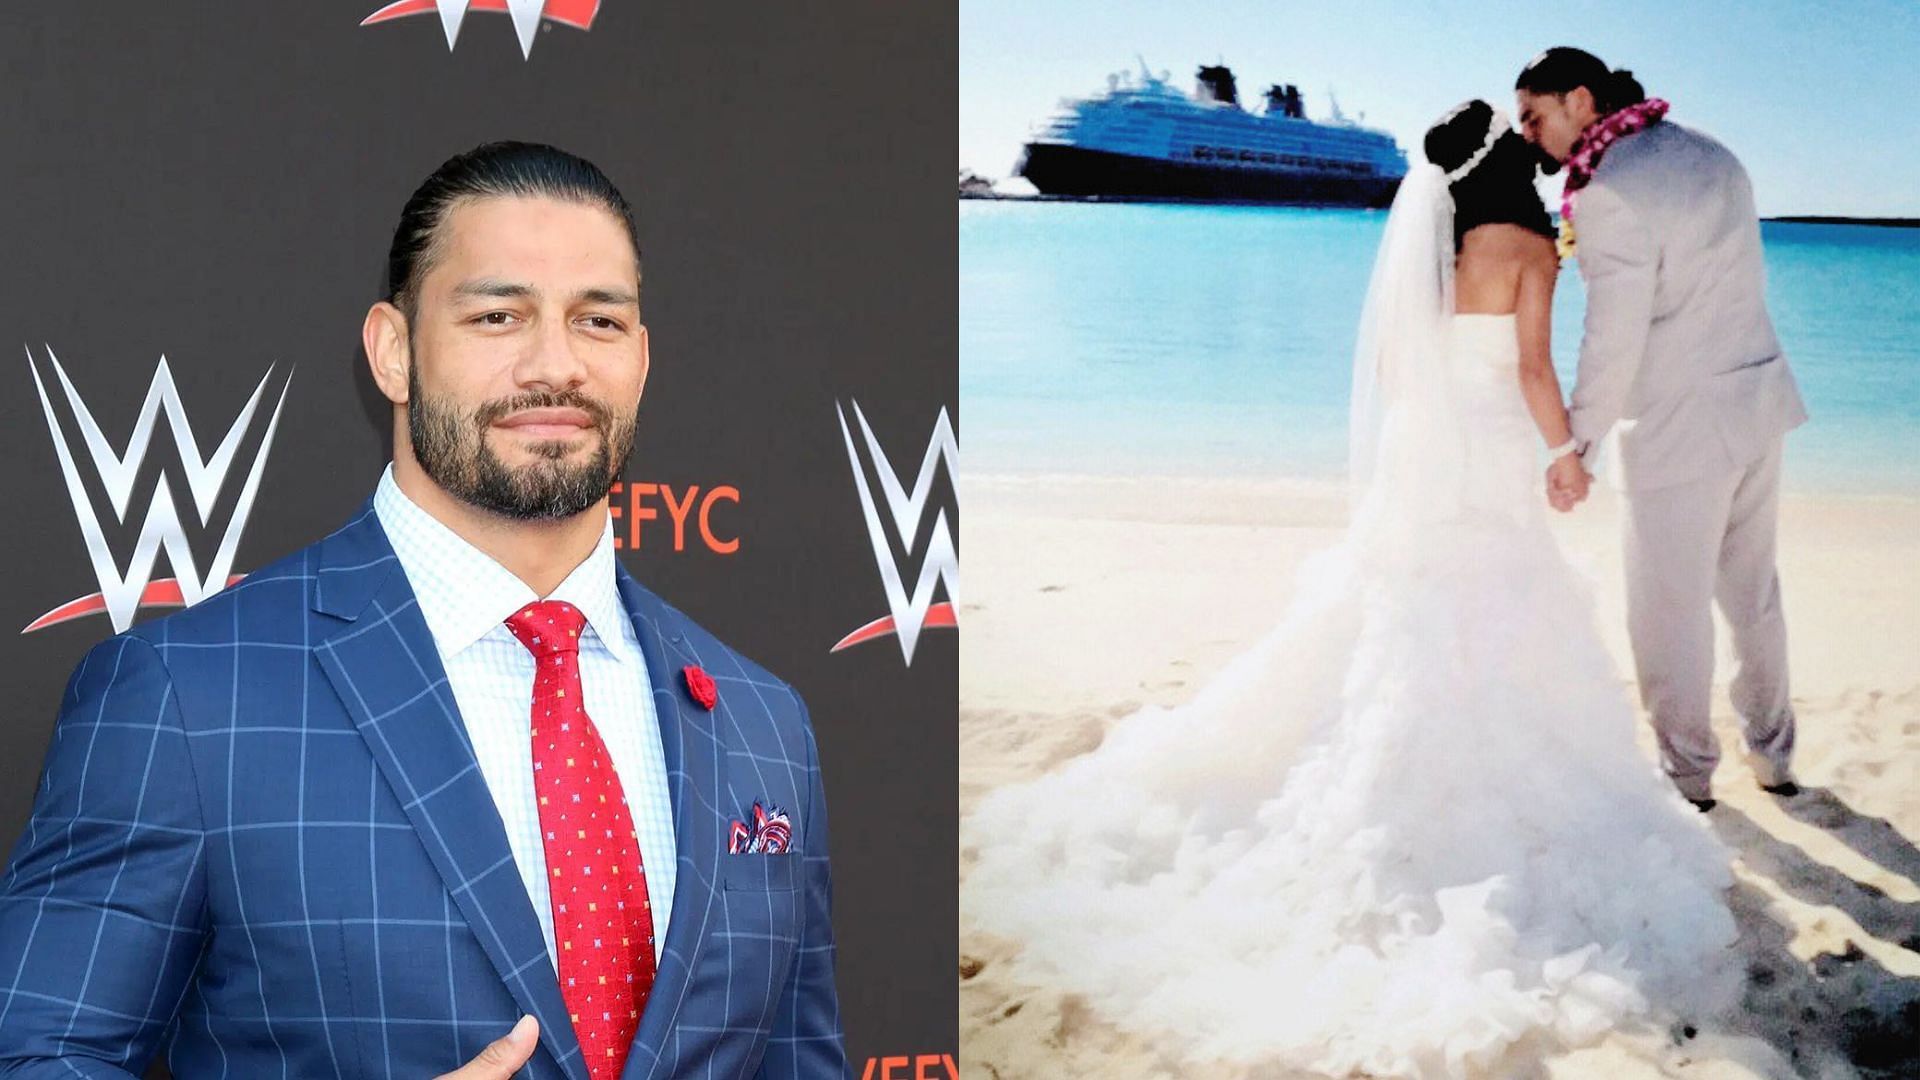 WWE SmackDown star Roman Reigns with his wife Galina Becker